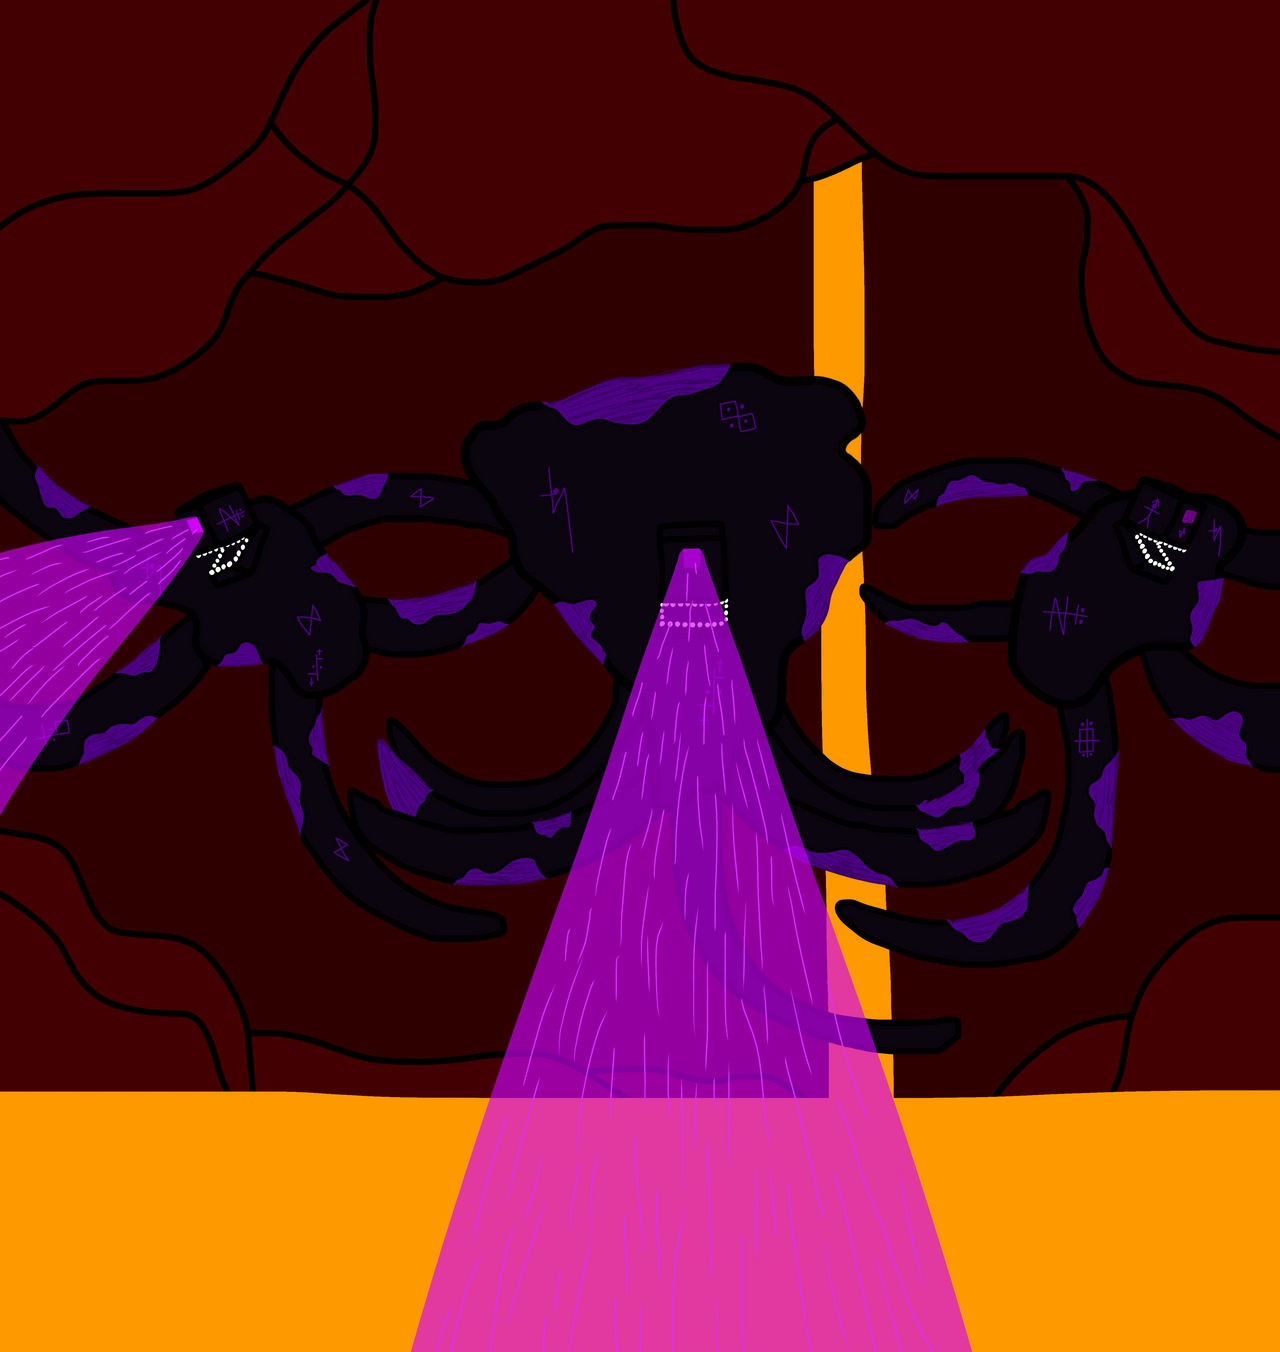 The Wither Storm On Scratch 